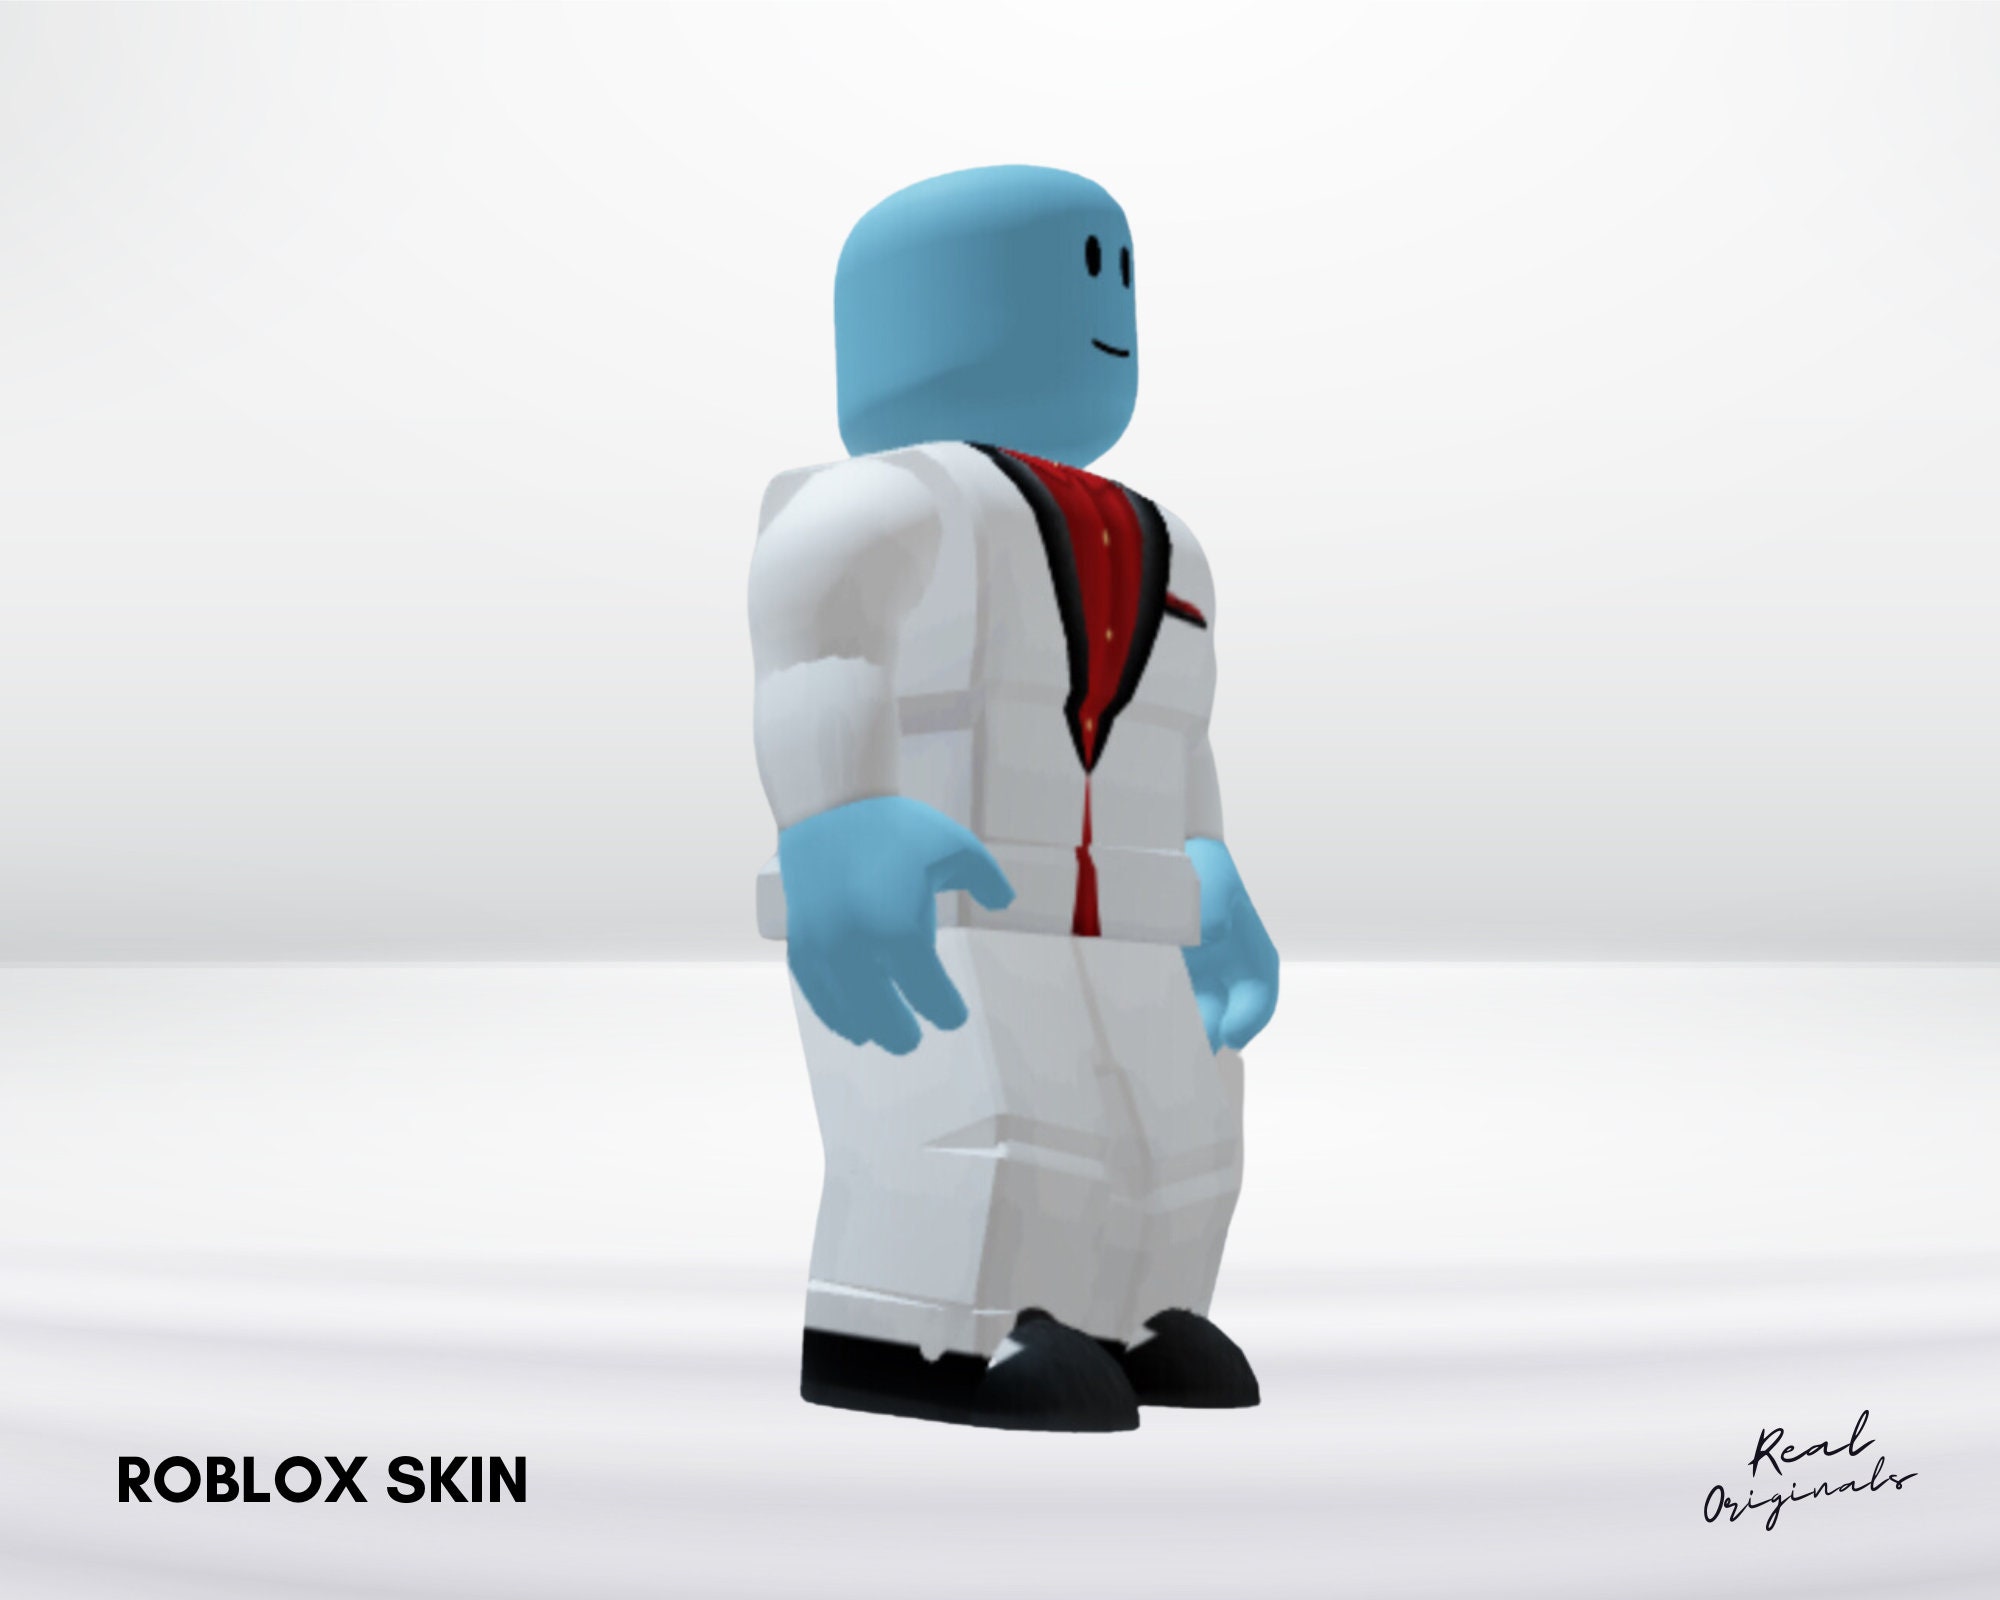 can you fix this shirt template so i can upload it to roblox its supposed  to be a medic. : r/roblox